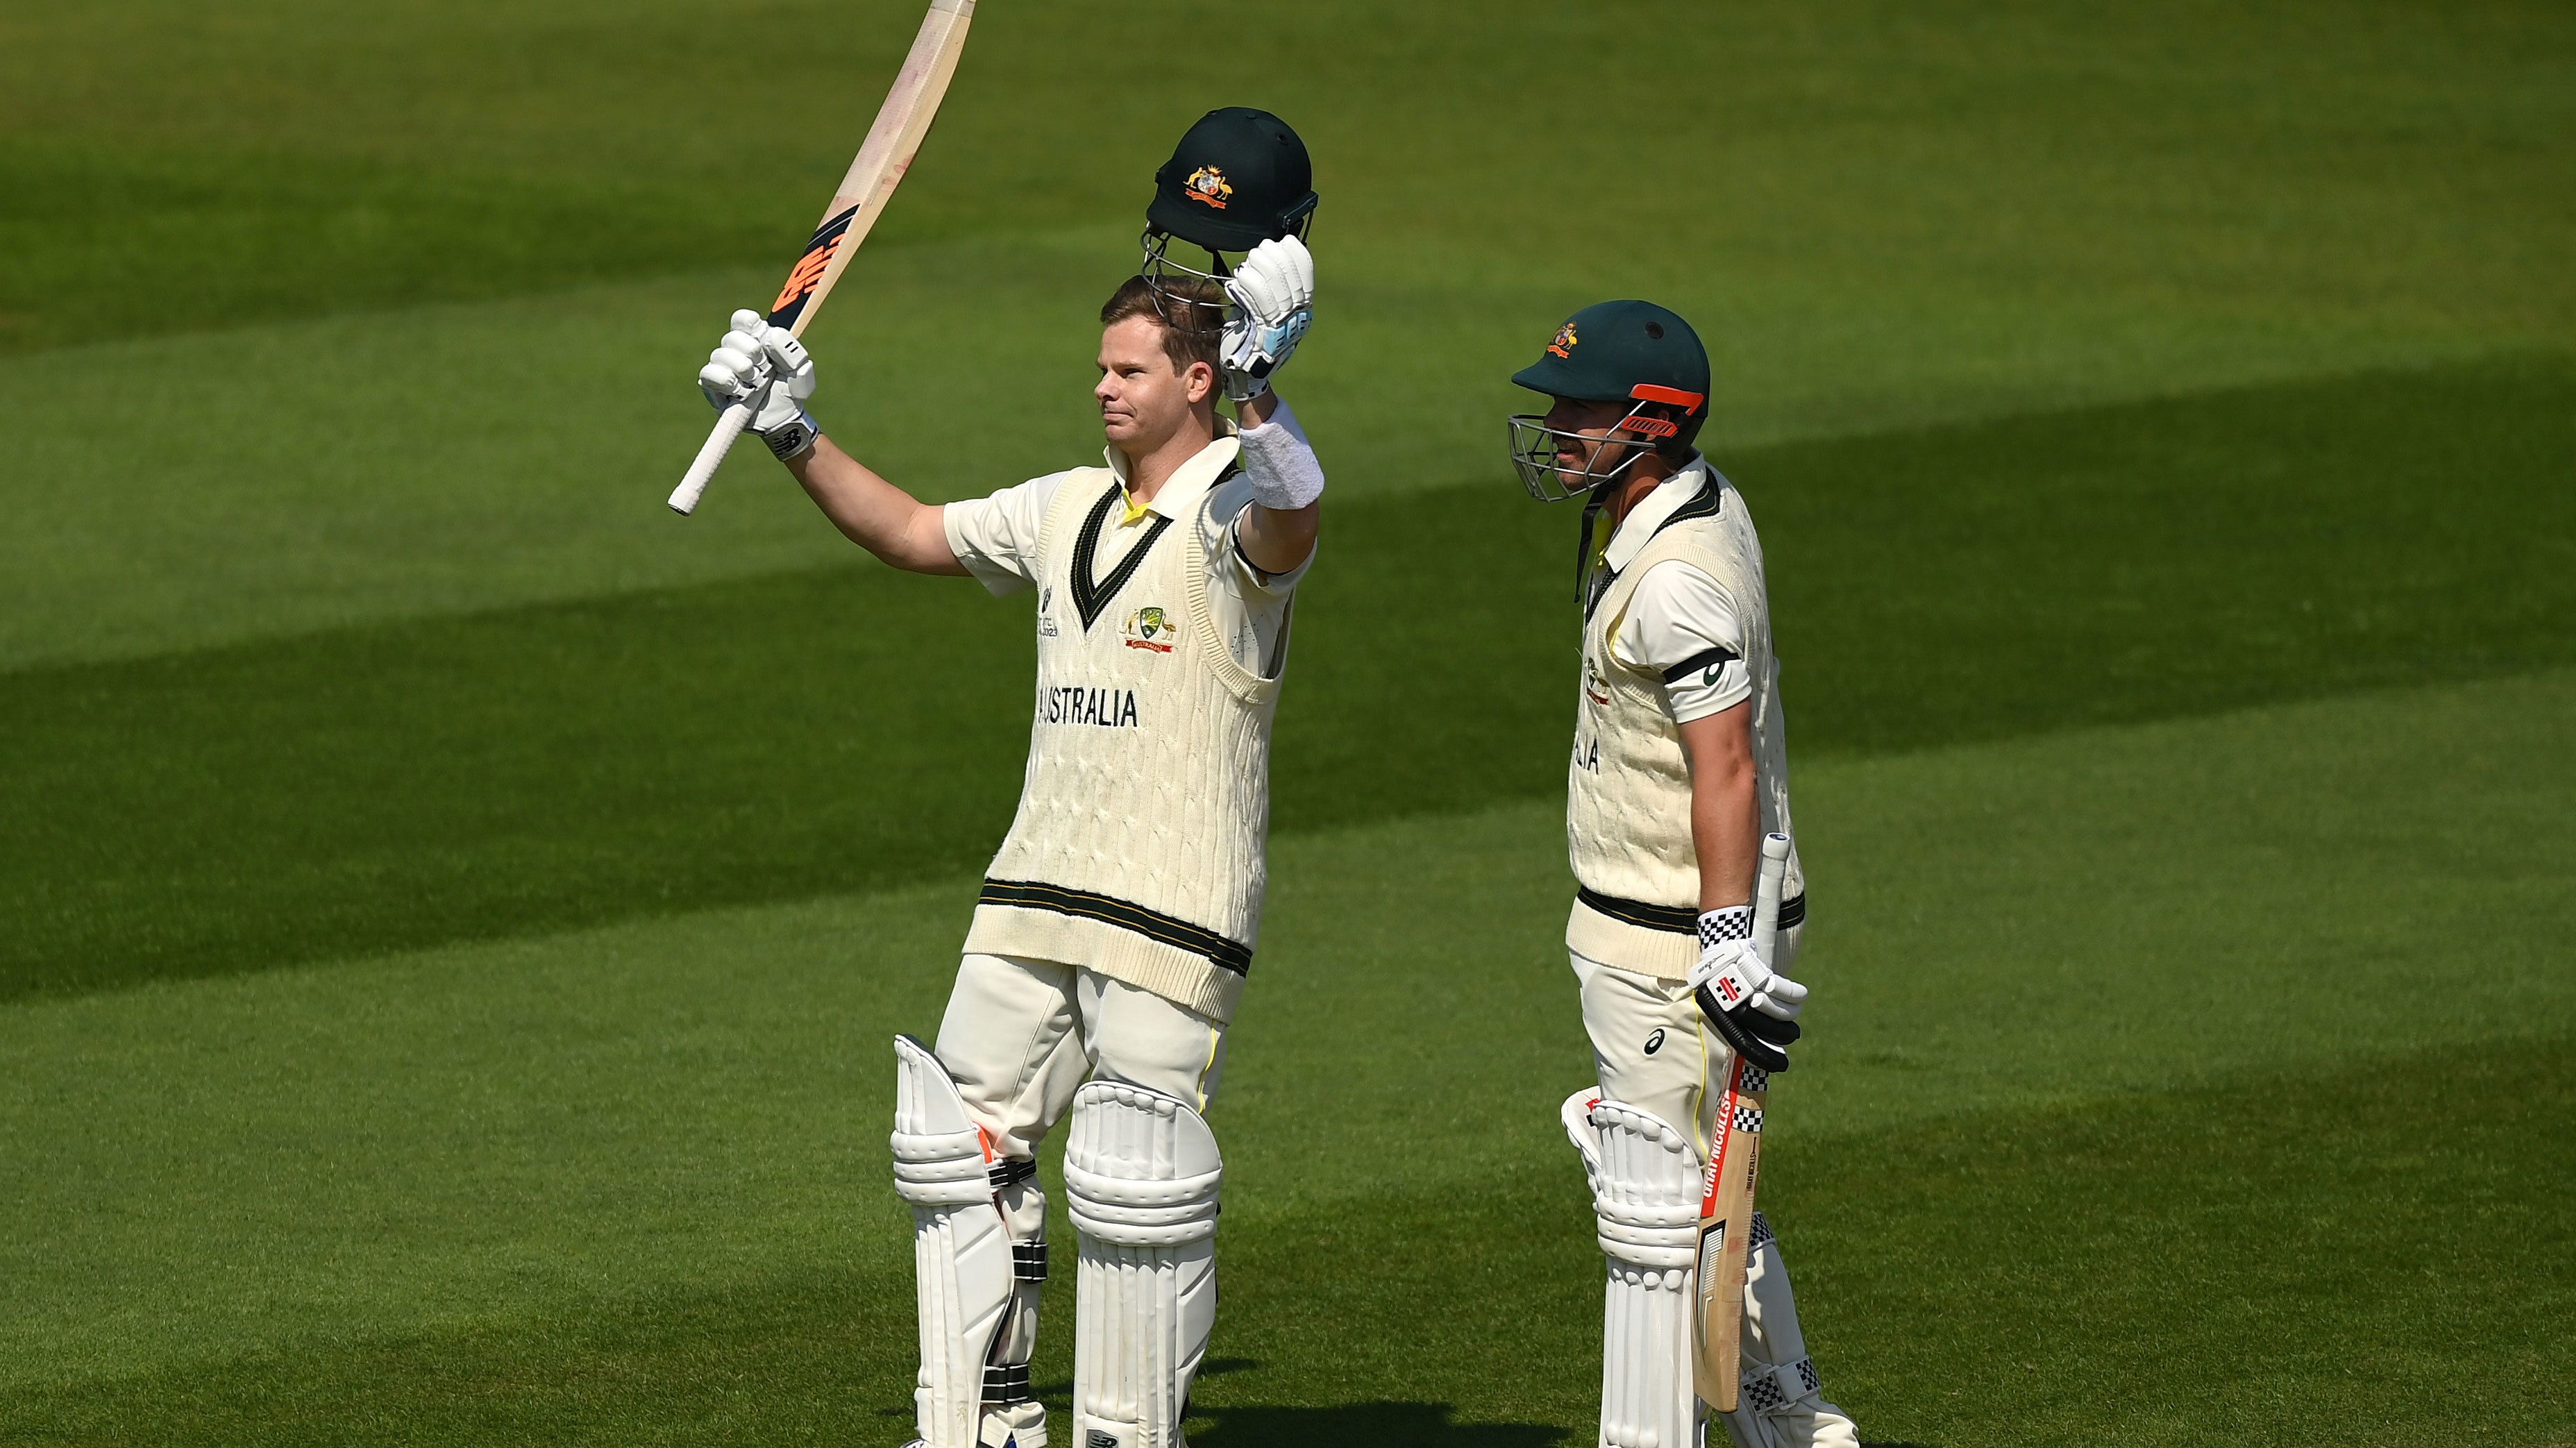 Steve Smith celebrates his century alongside teammate Travis Head during day two of the ICC World Test Championship Final between Australia and India at The Oval. 